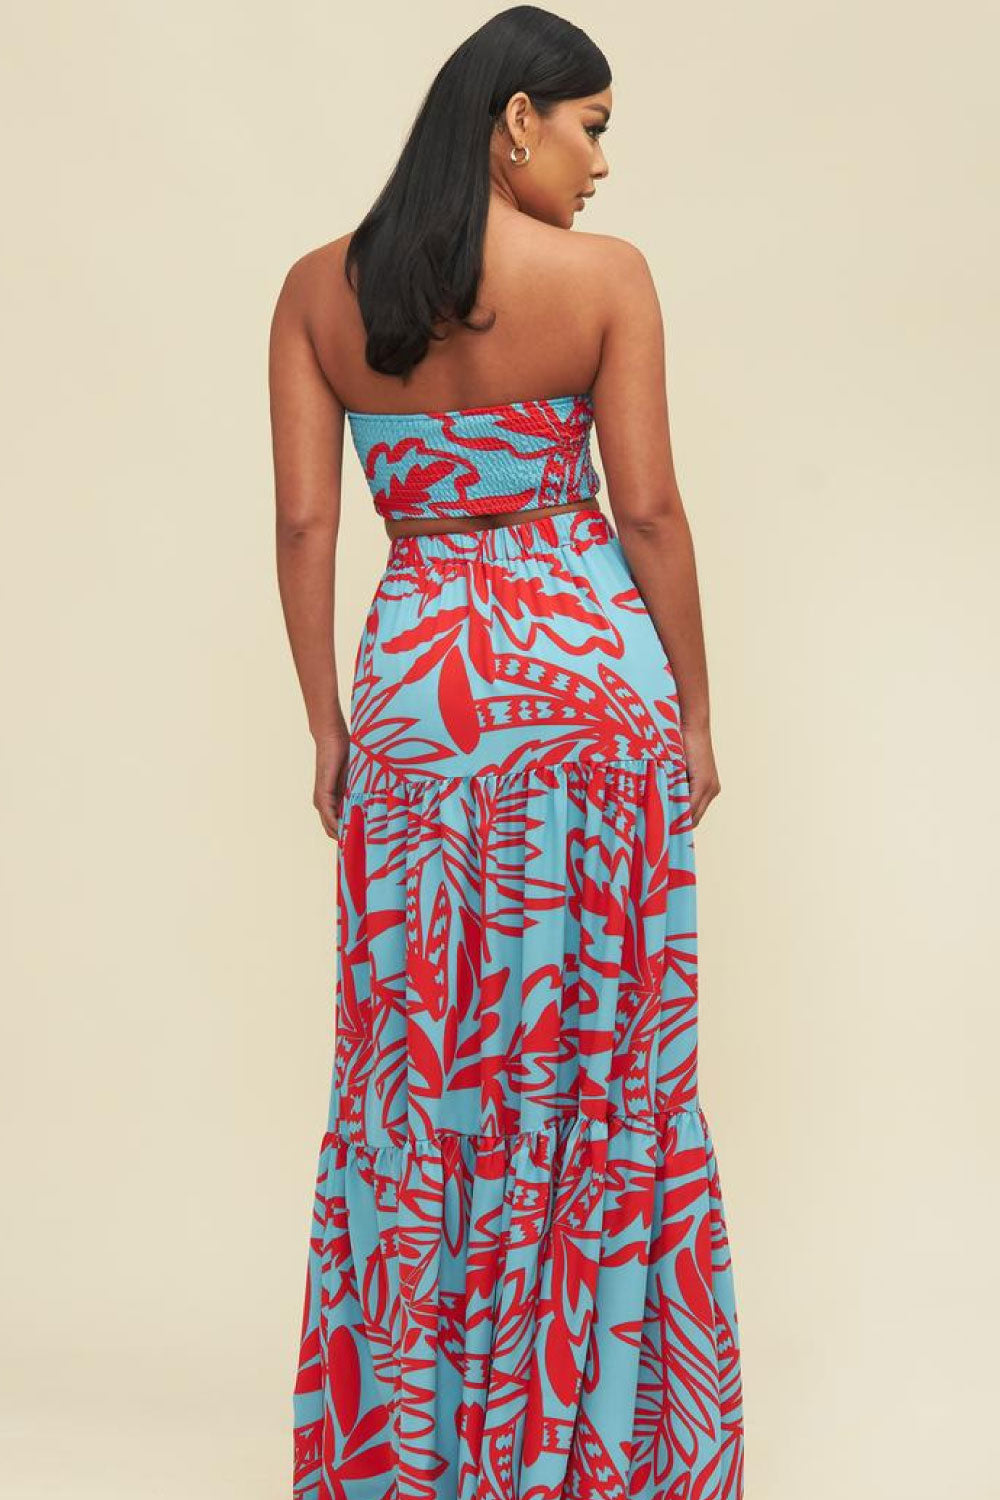 Image of the back of the Striped Red and Blue Two Piece Set on a model.